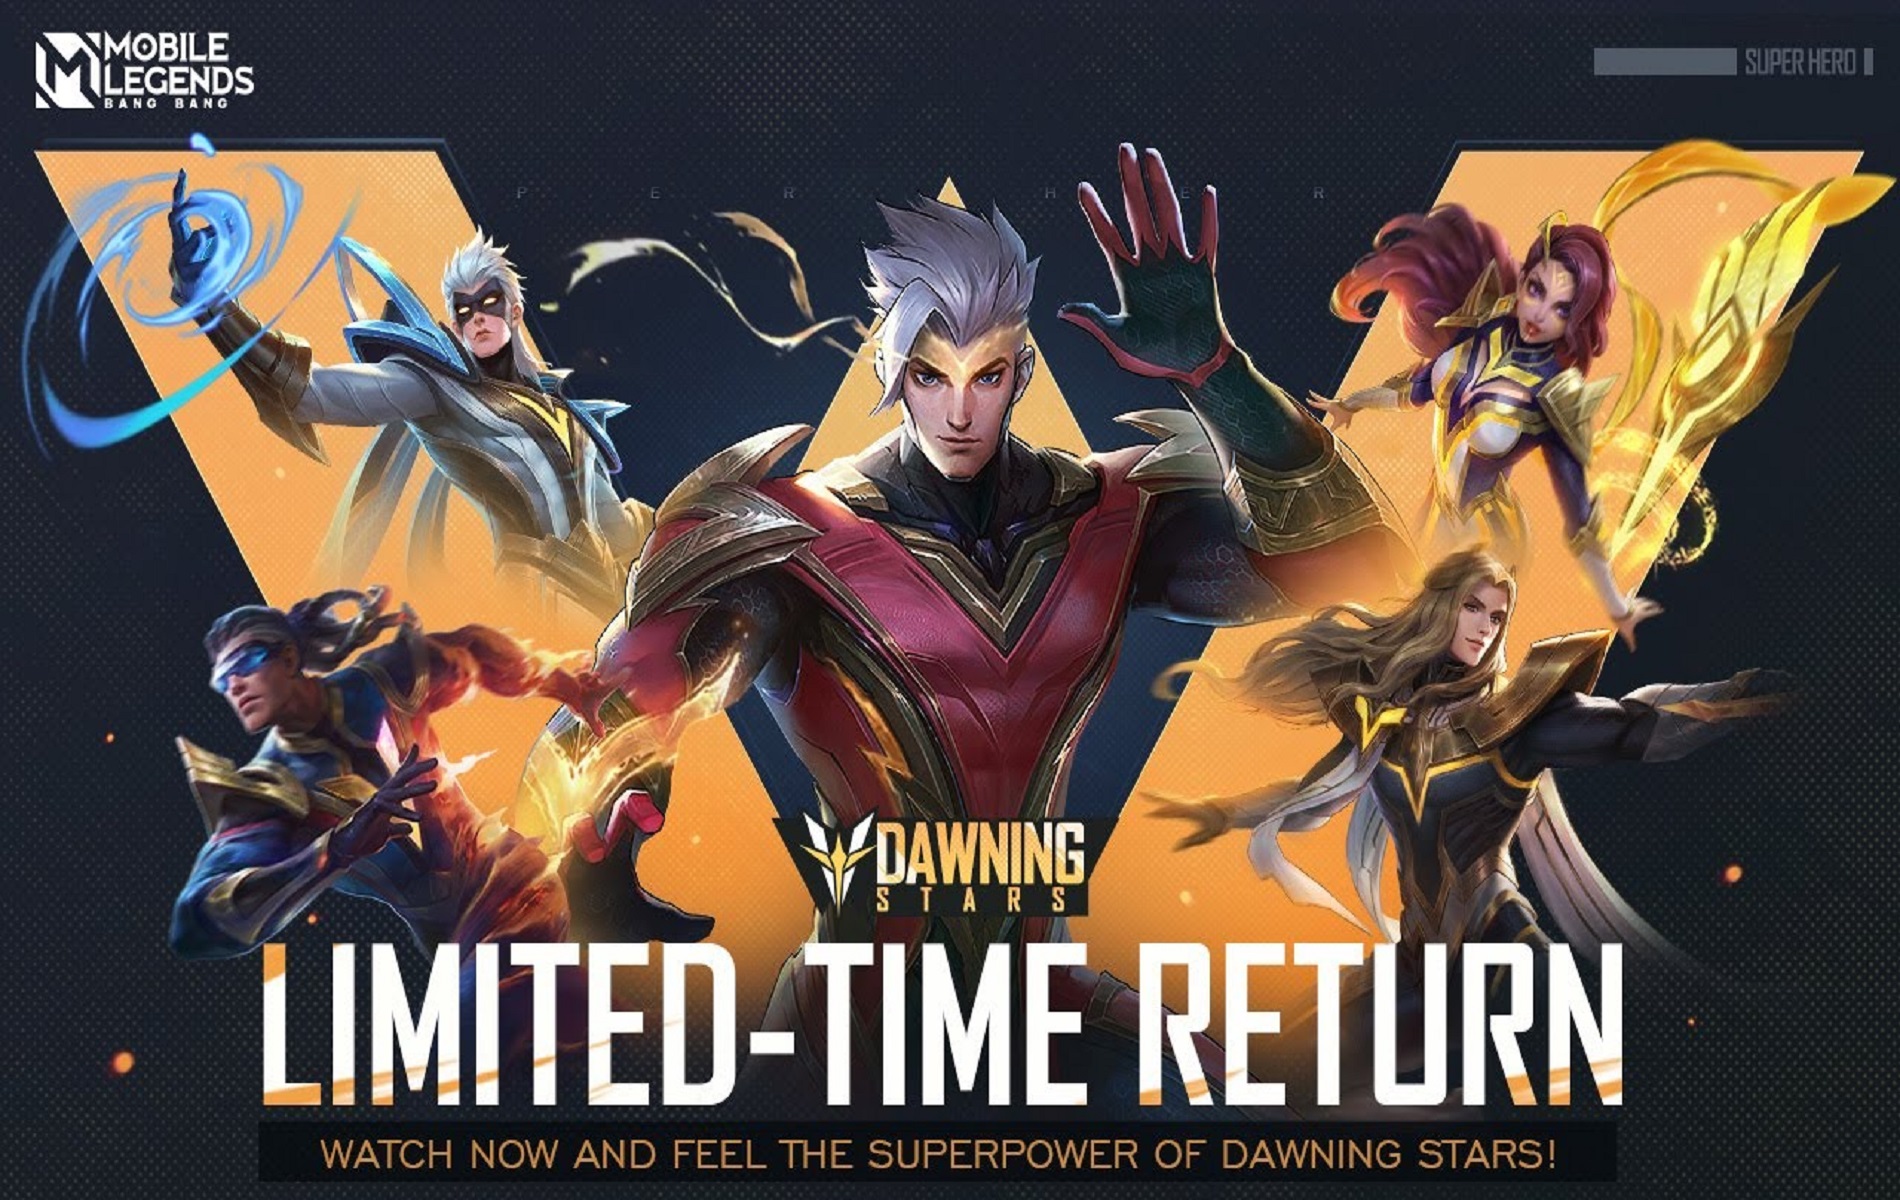 Mobile Legends Dawning Stars Event Phase 1 and Phase 2 Release Date